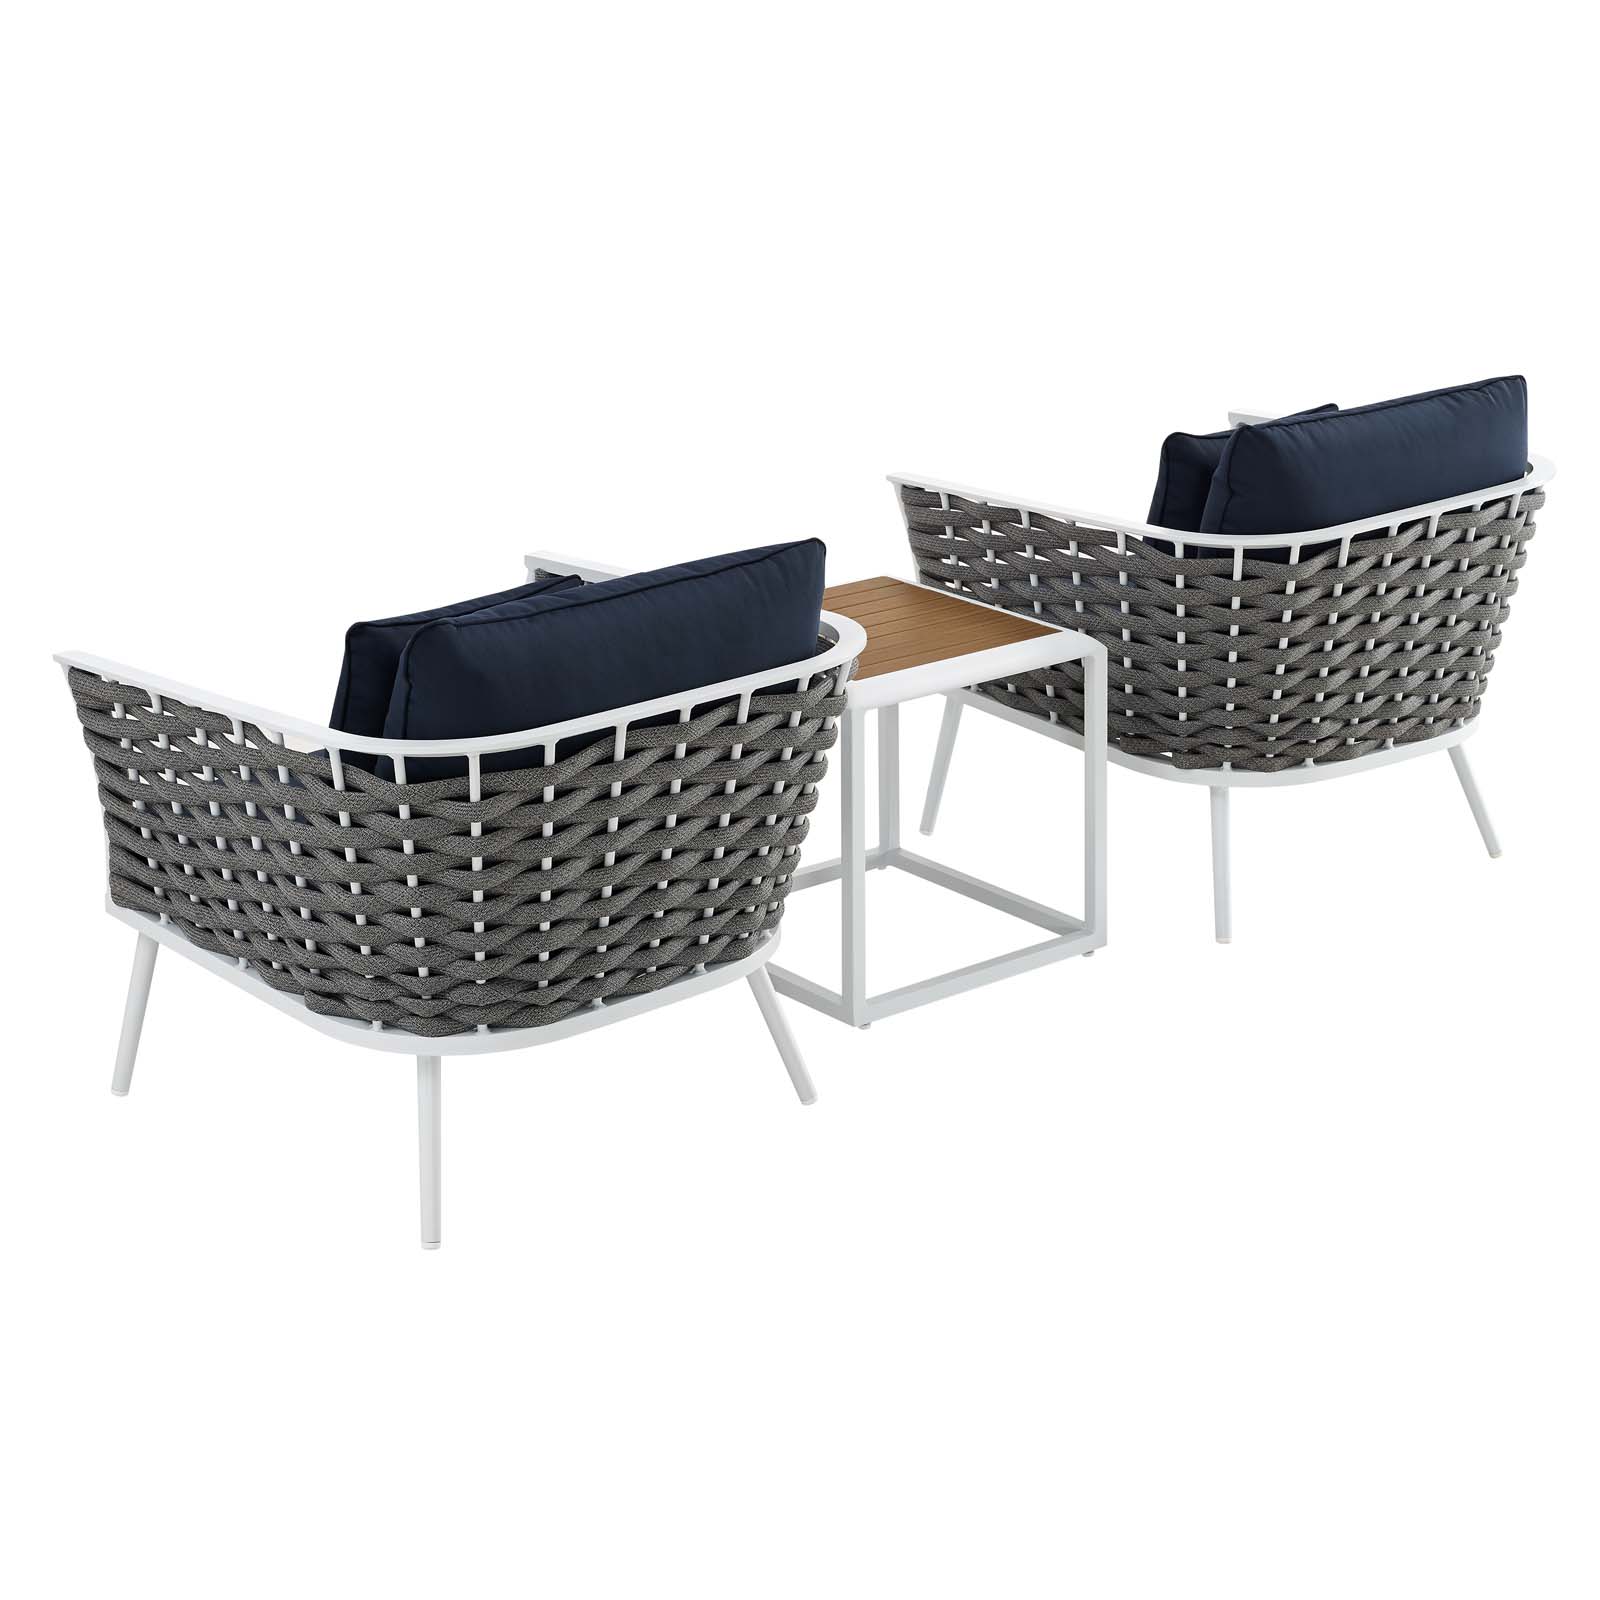 Modern Contemporary Urban Outdoor Patio Balcony Garden Furniture Lounge Chair Armchair and Side Table Set, Fabric Aluminium, White Navy - image 2 of 8